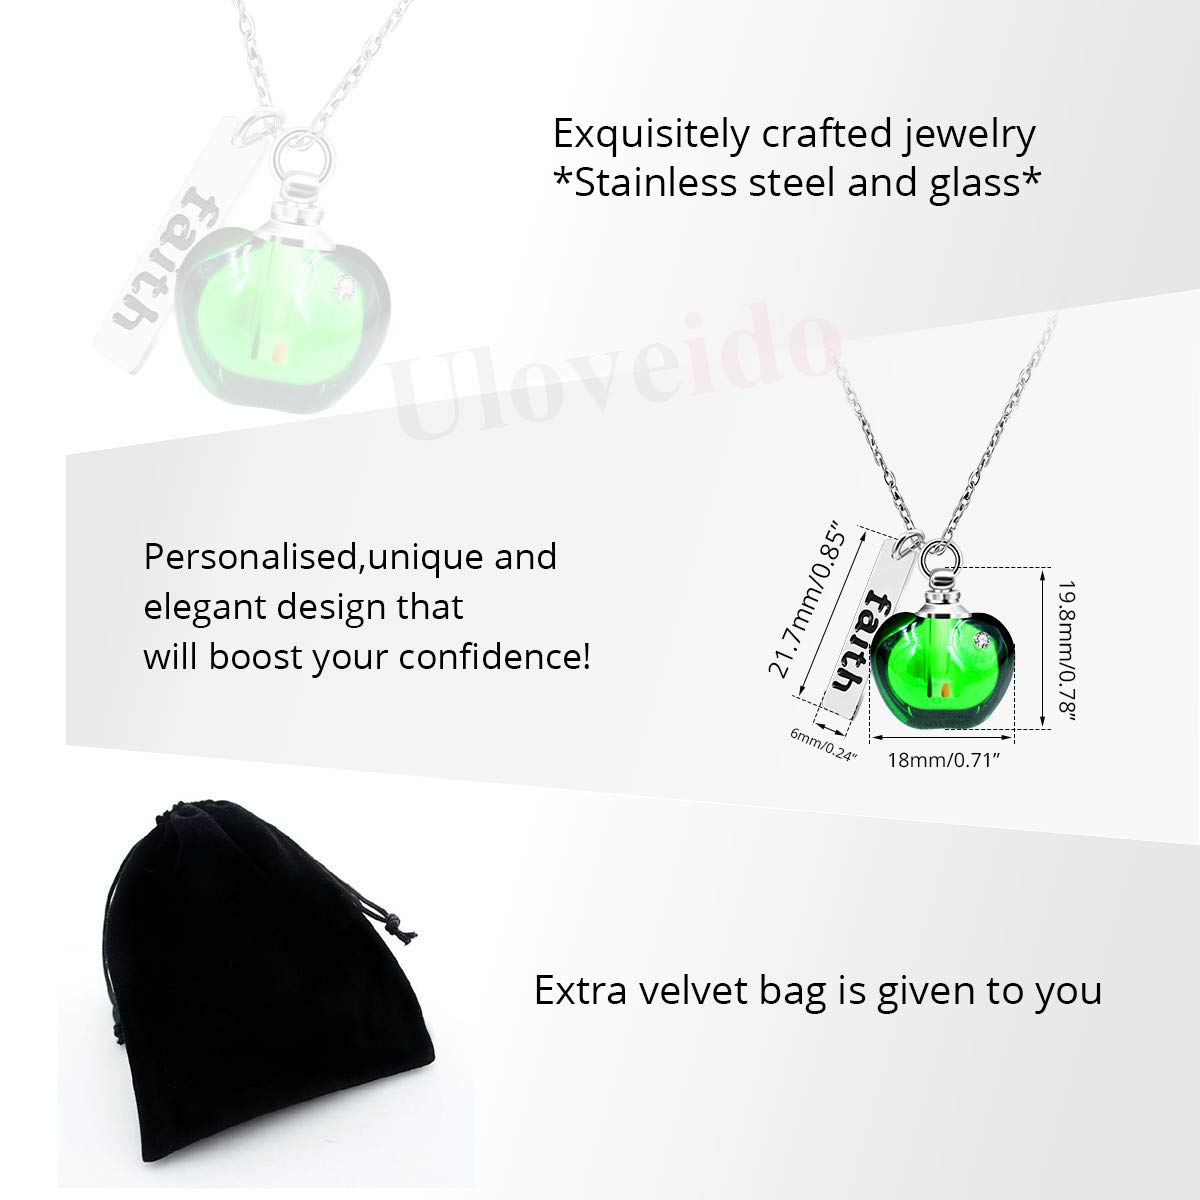 Uloveido Stainless Steel Faith Pendant Necklace with Mustard Seed in Apple Shape Openable Bottle Case Charms Christian Necklaces Y786